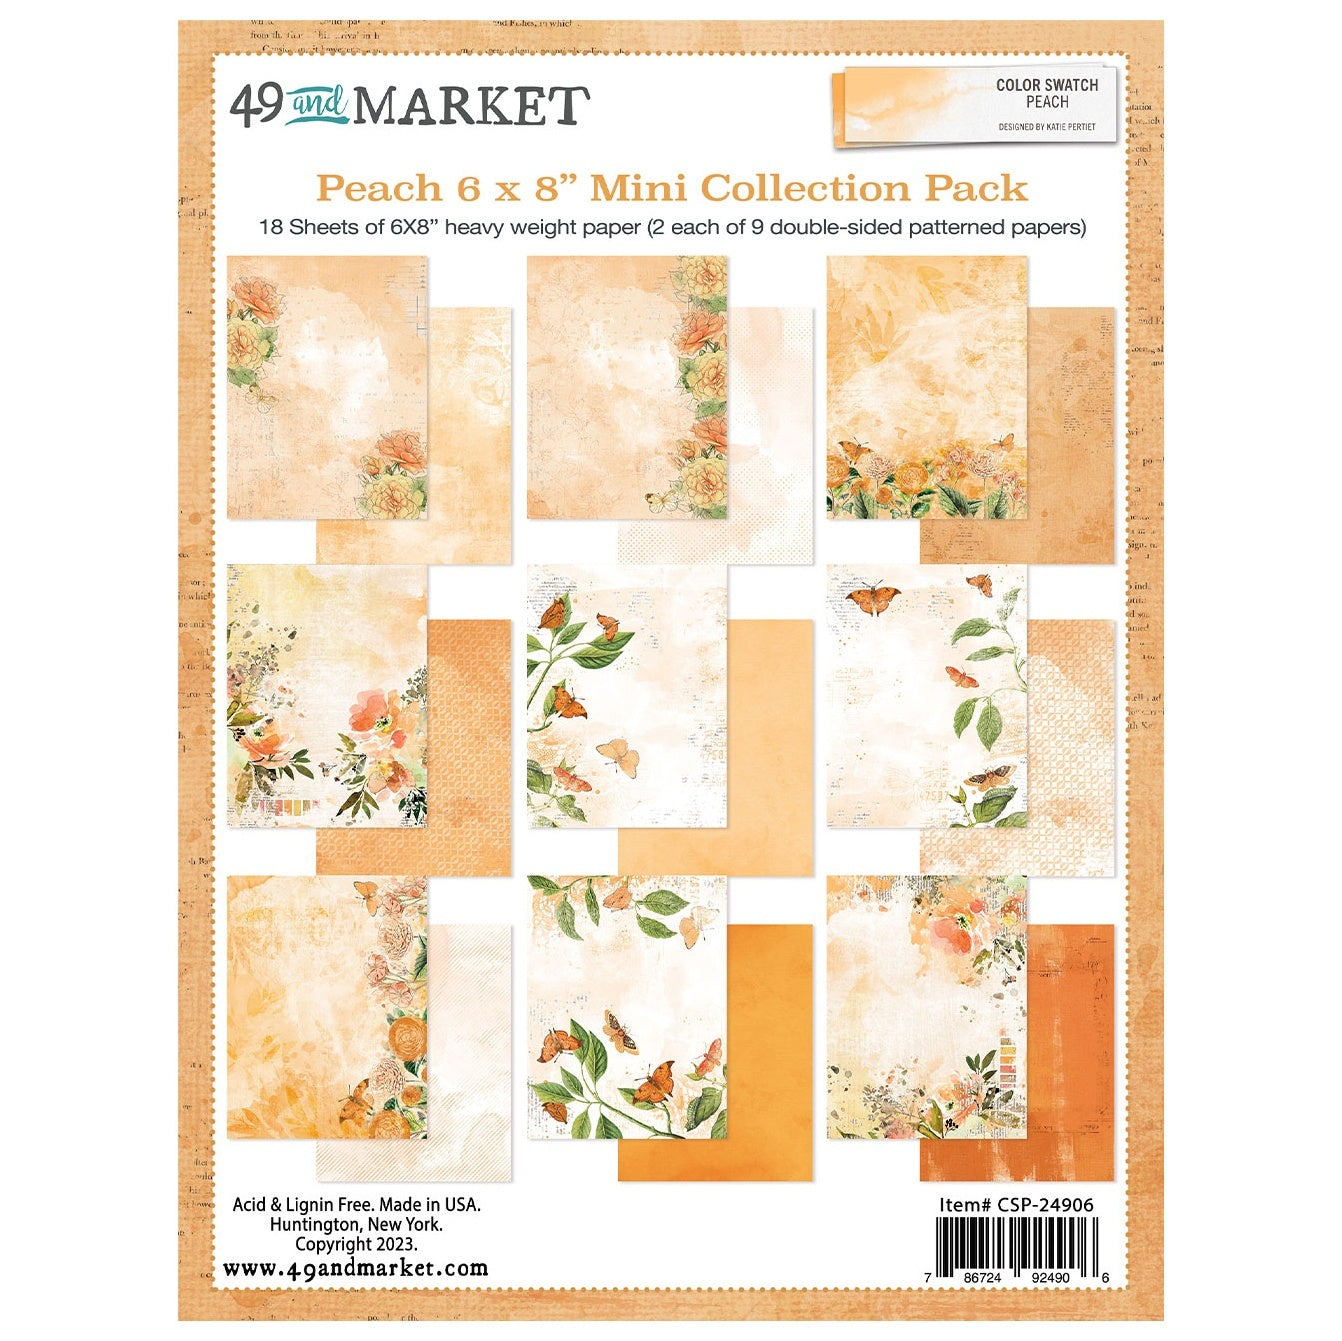 49 and Market  - 6 x 8 mini collection  - Color Swatch  Peach